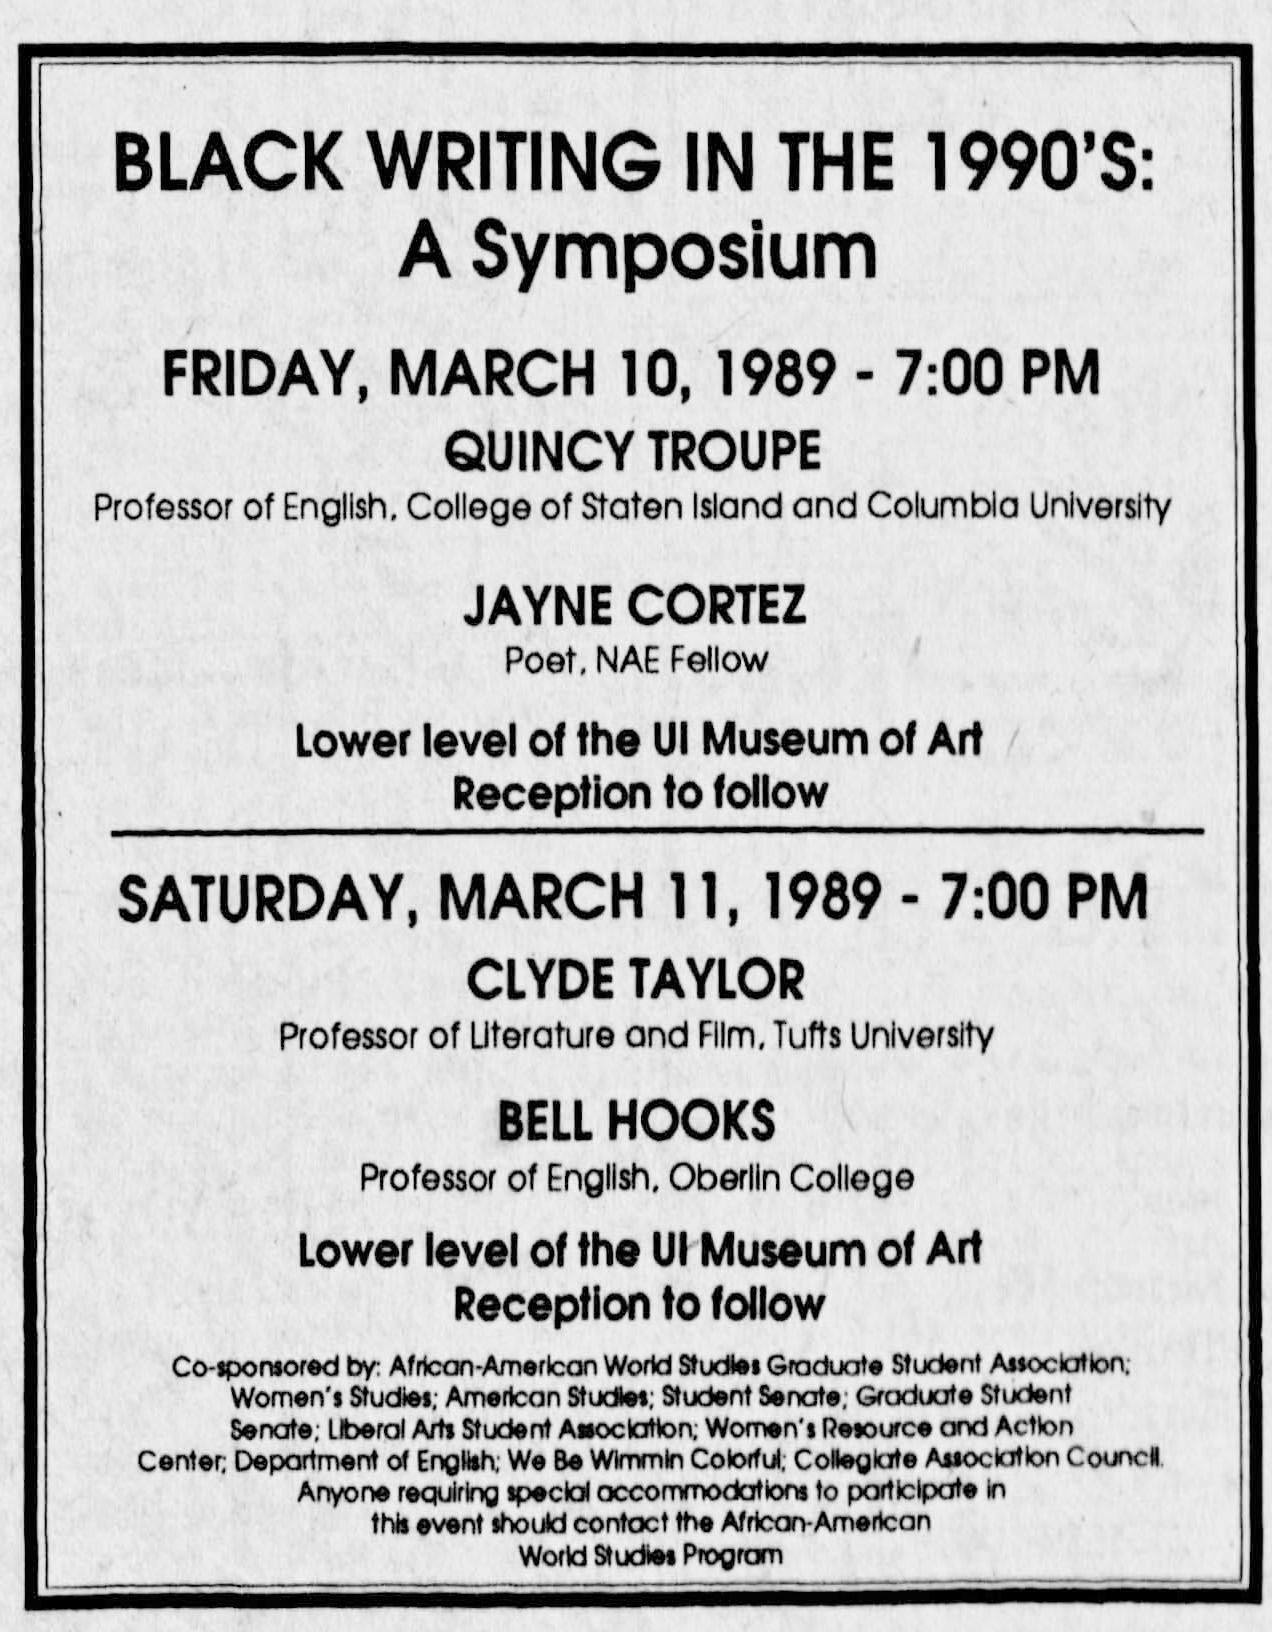 bell hooks participated in a University of Iowa symposium on Black writing in 1989